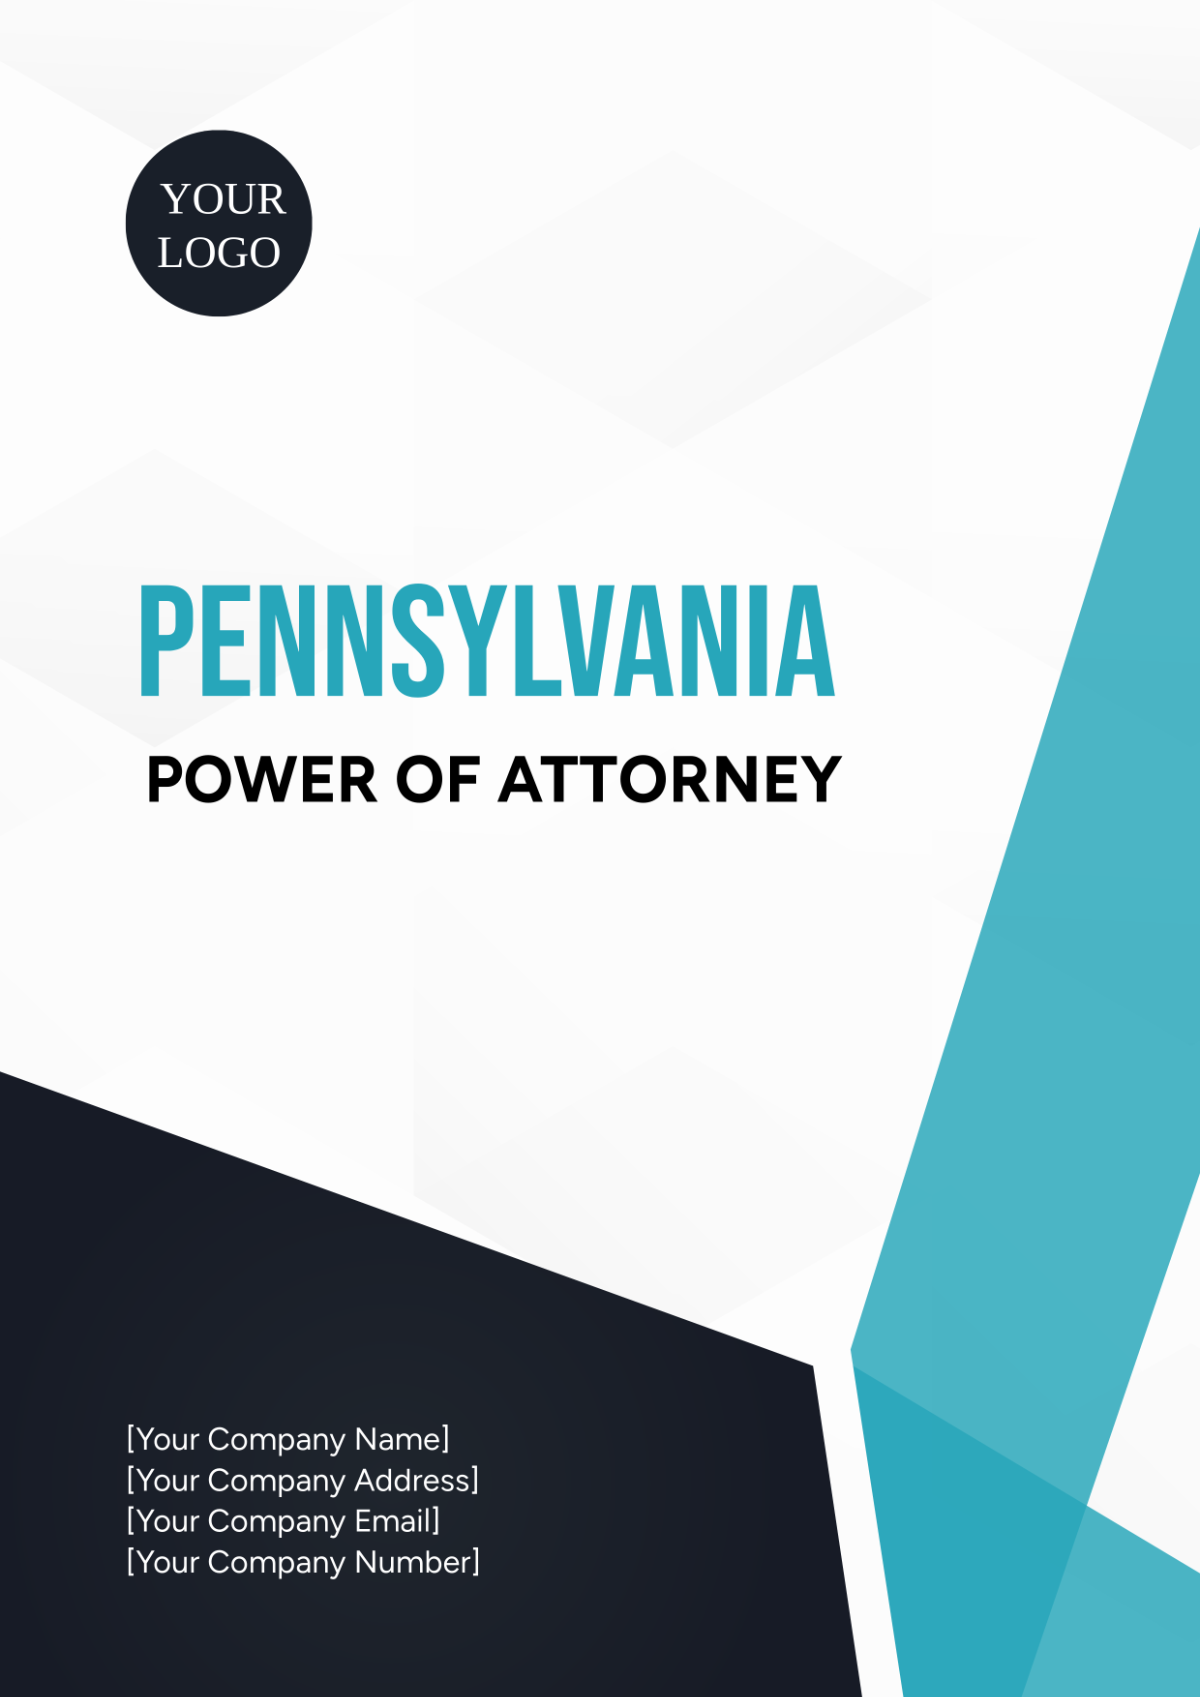 Pennsylvania Power of Attorney Cover Page